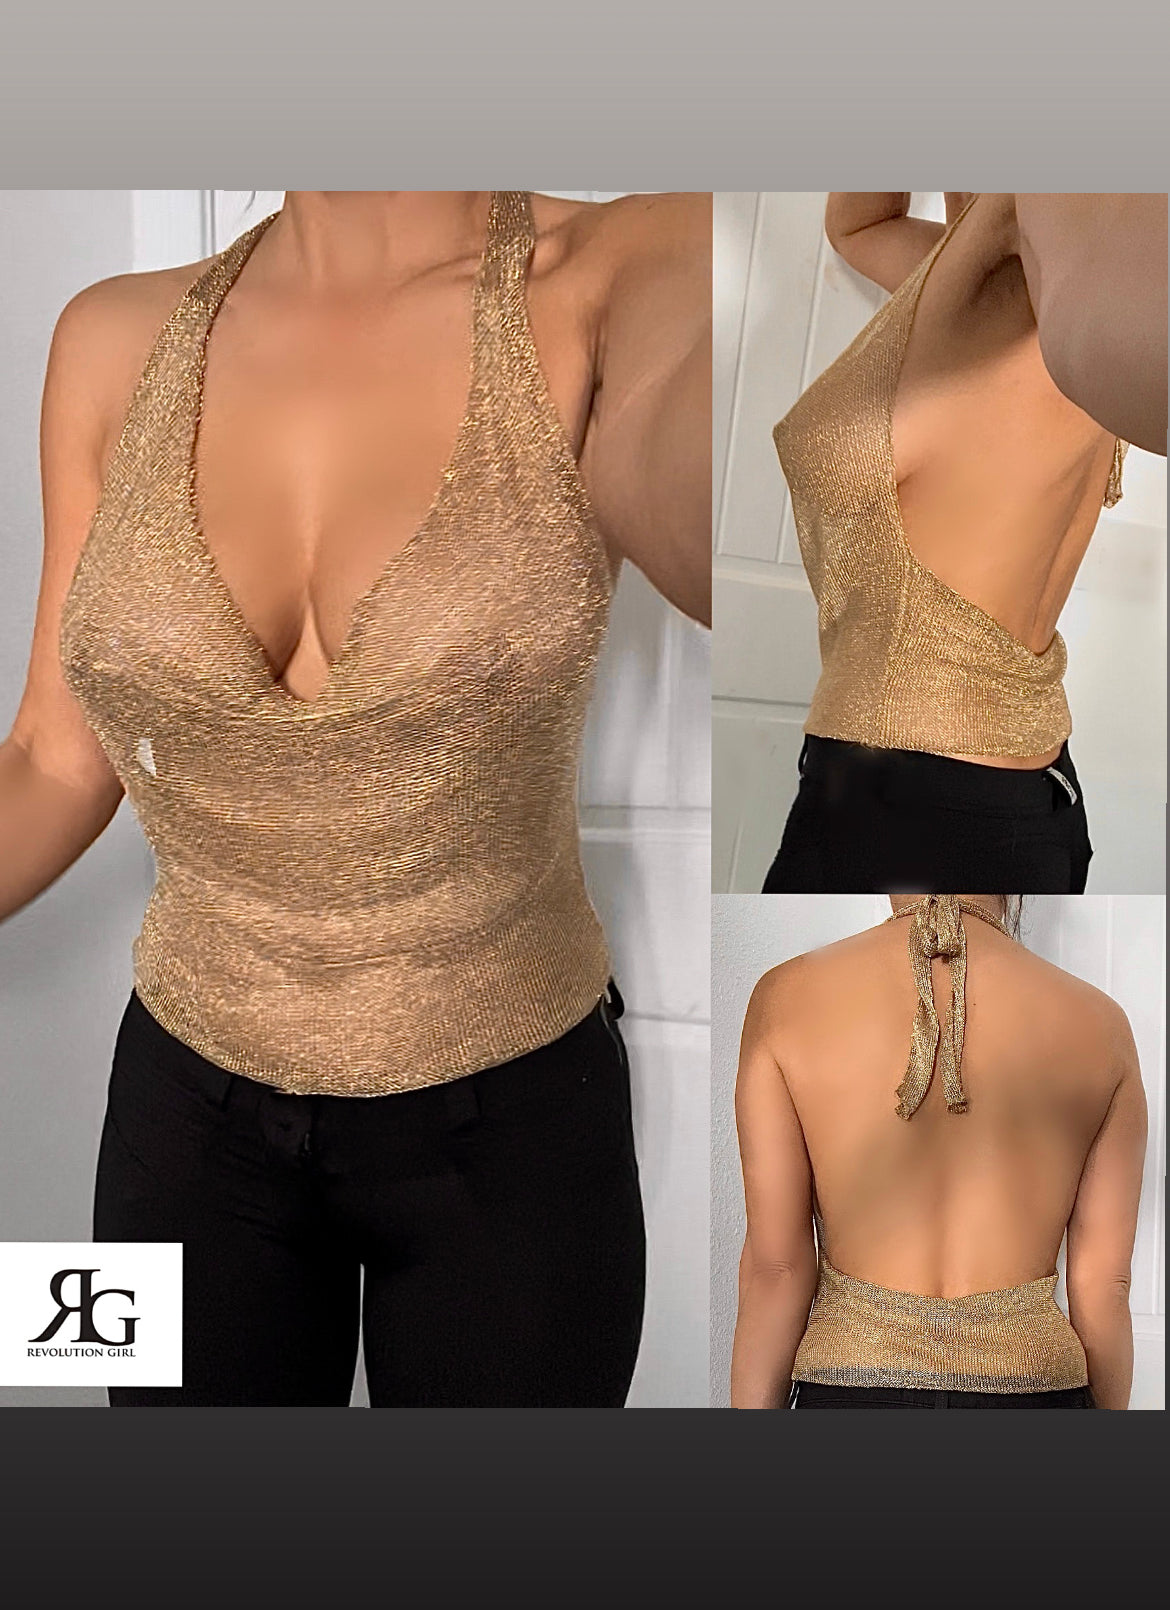 Sexy Gold Metallic Halter Drop Neck Chain Link Knit Top By Revolution Girl ⭐️